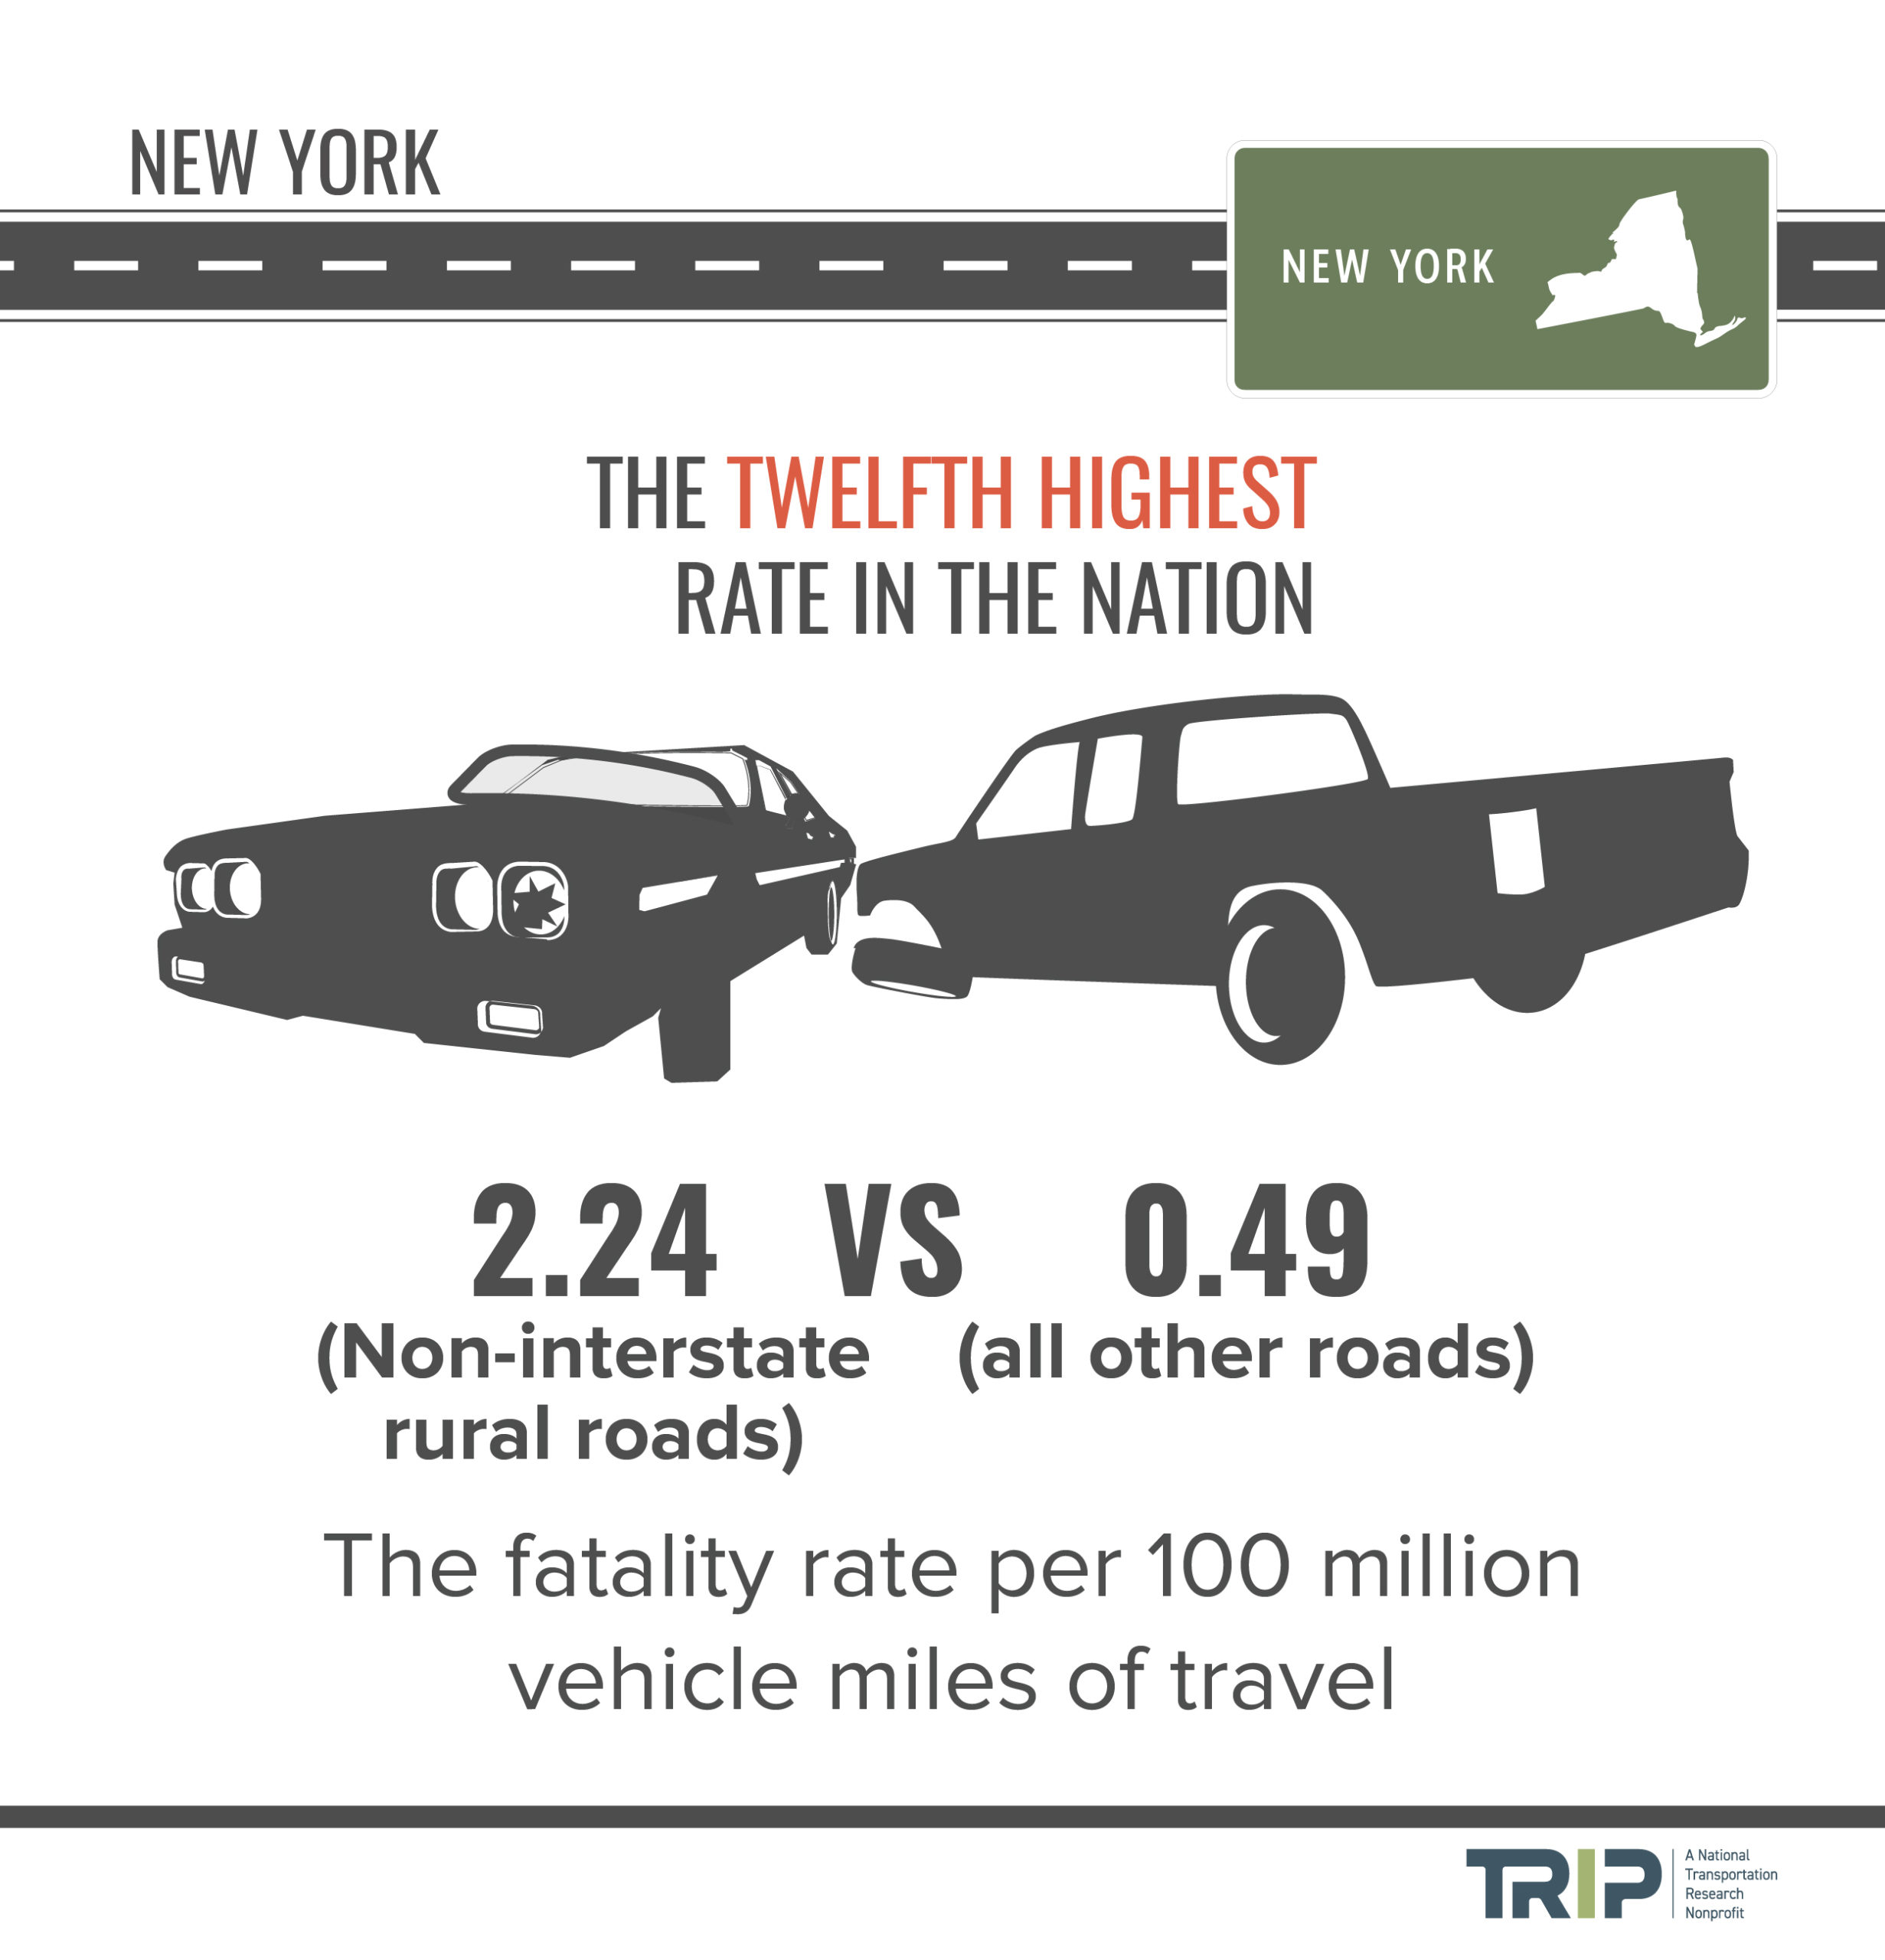 New York Fatality Rate Infographic – December 2020